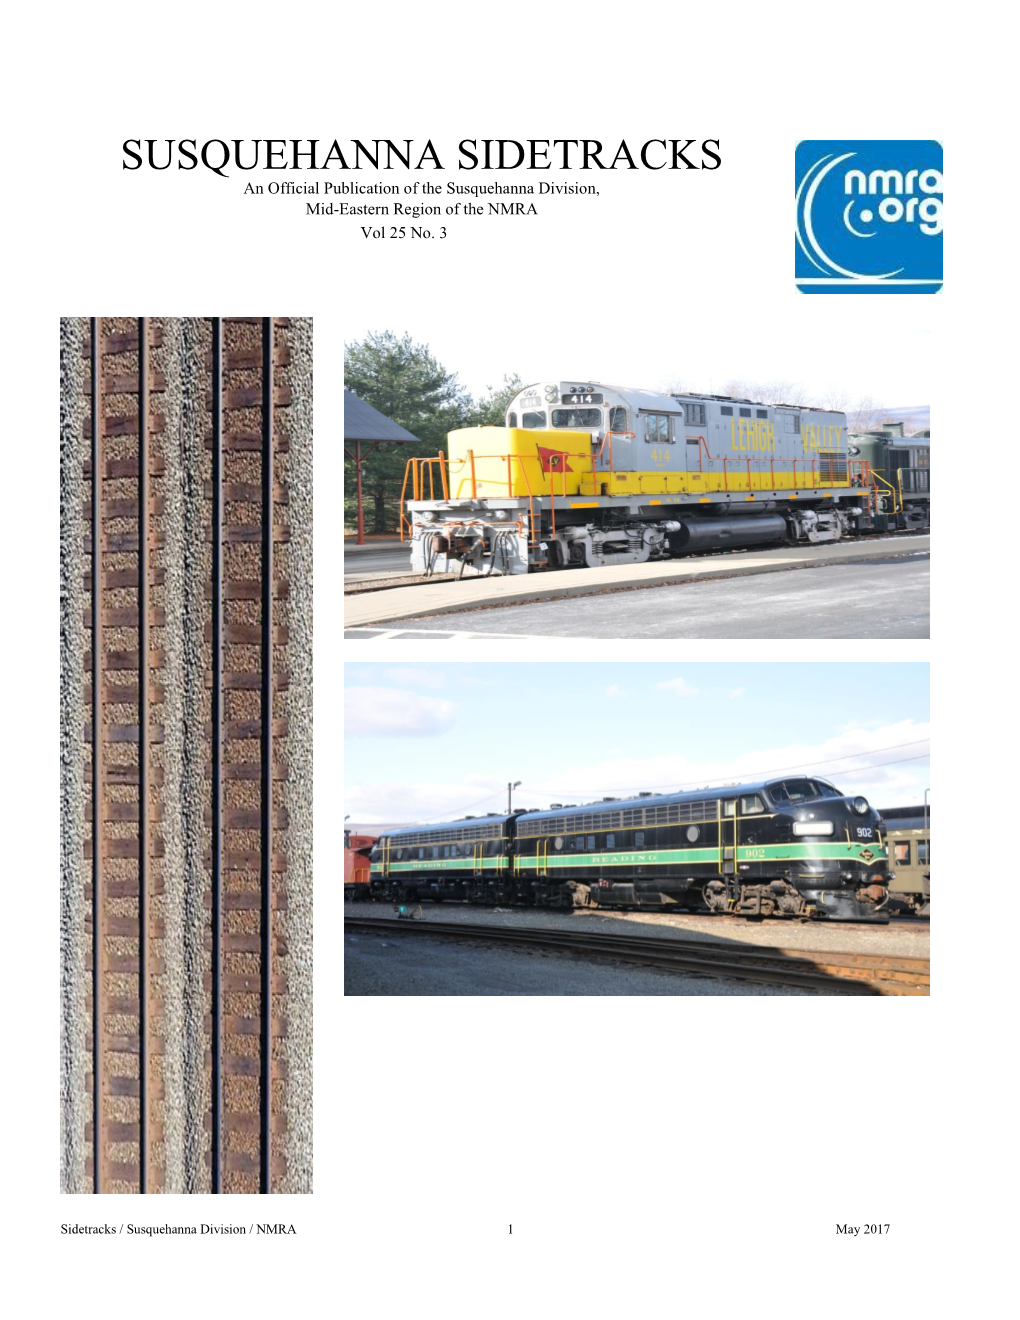 SUSQUEHANNA SIDETRACKS an Official Publication of the Susquehanna Division, Mid-Eastern Region of the NMRA Vol 25 No